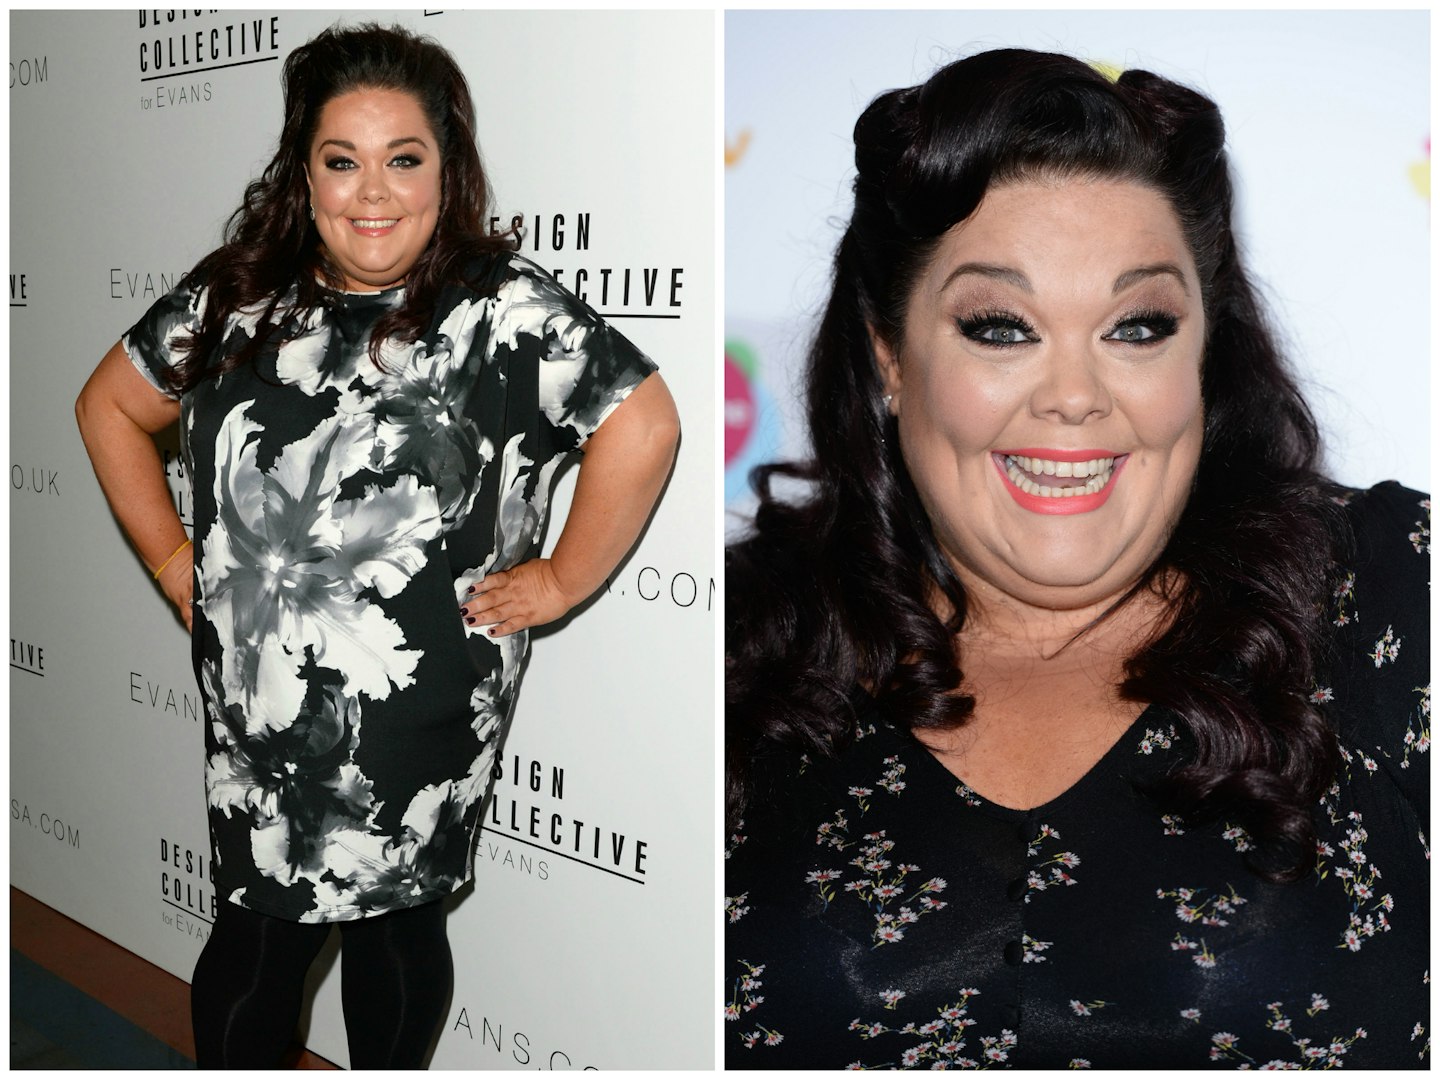 lisa-riley-loose-women-weight-loss-surgery-fears-crying